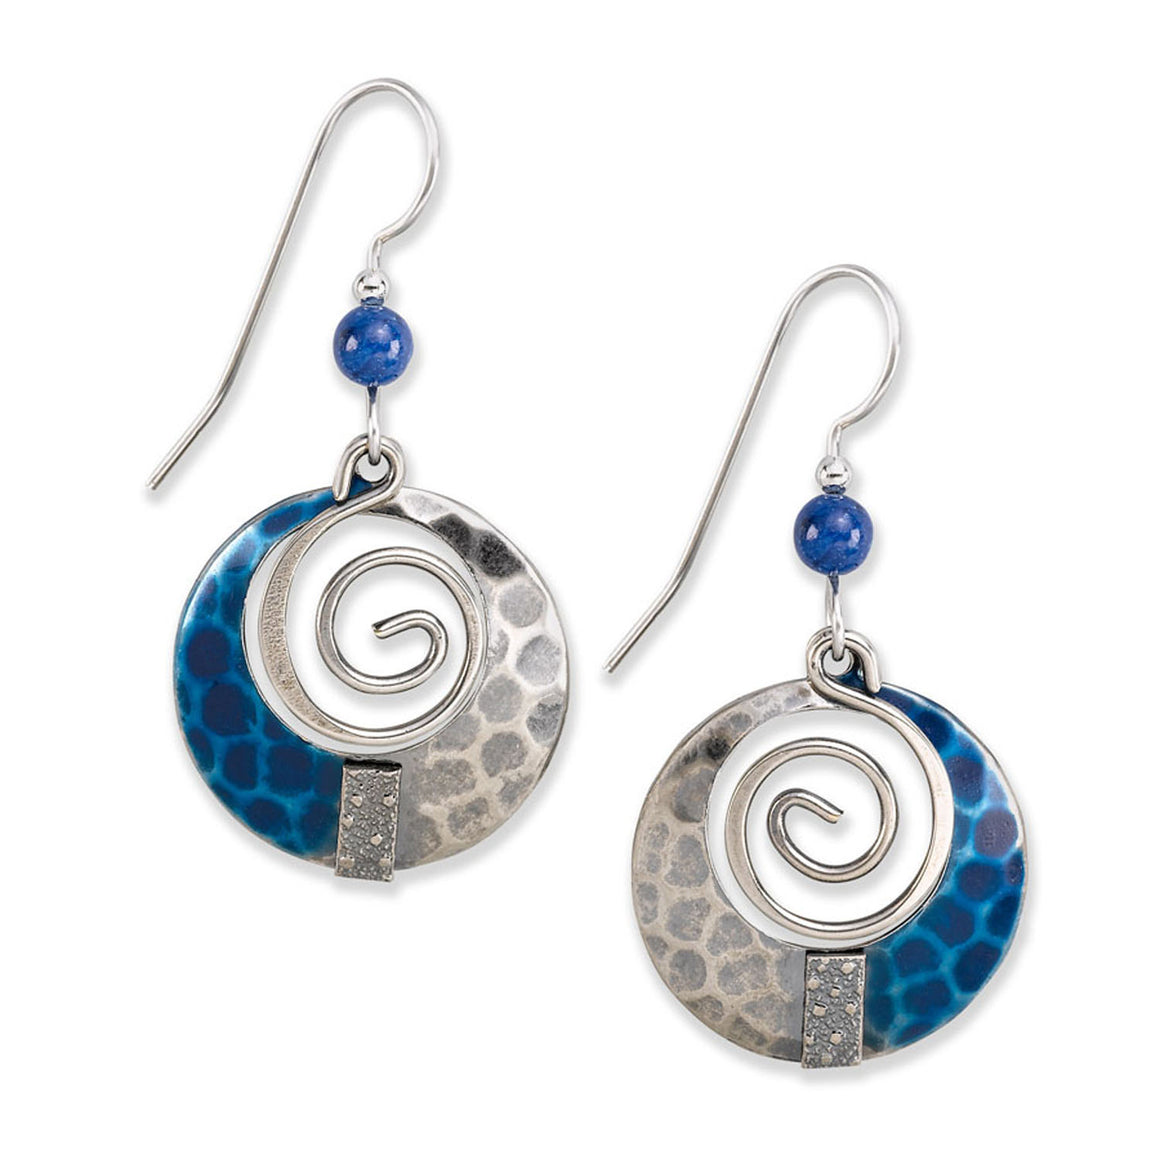 BLUE SPIRAL WITH BEADS - SILVER FOREST EARRINGS